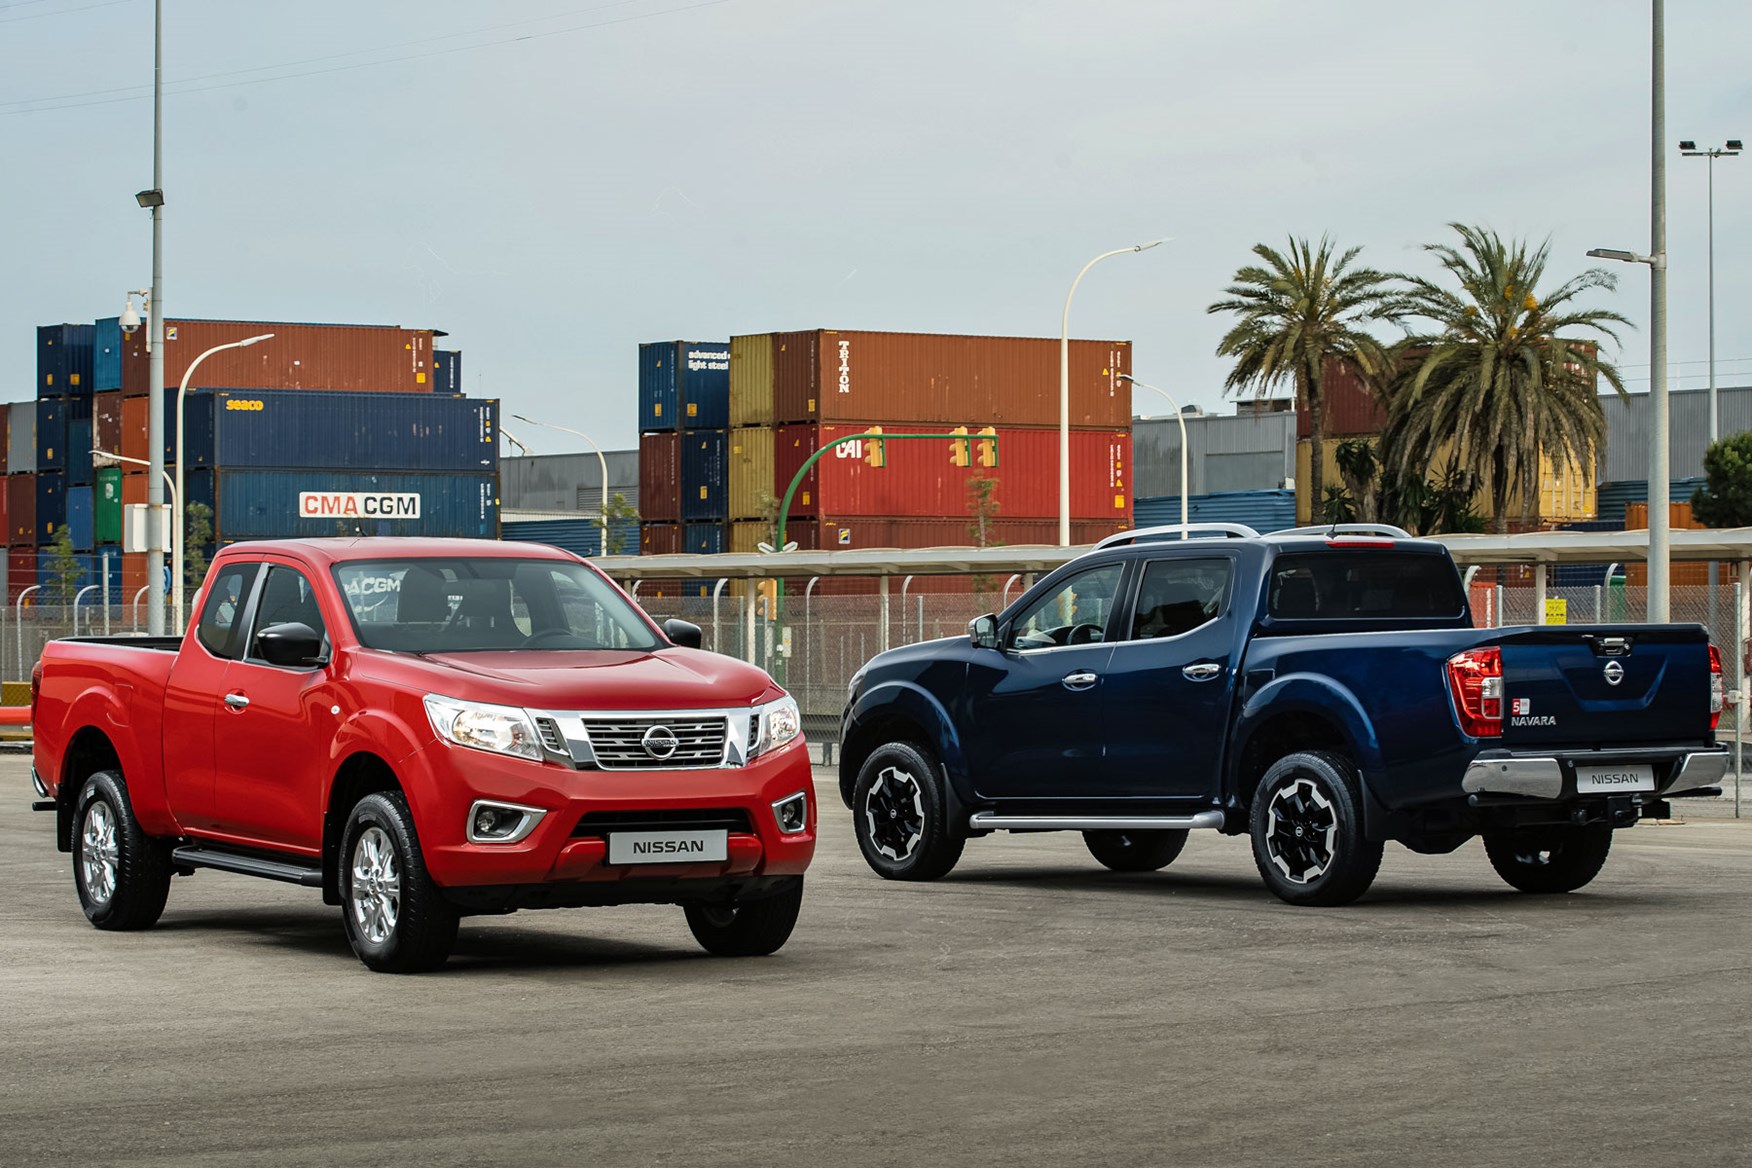 2019 Nissan Navara update - King Cab (red) and Double Cab (blue)